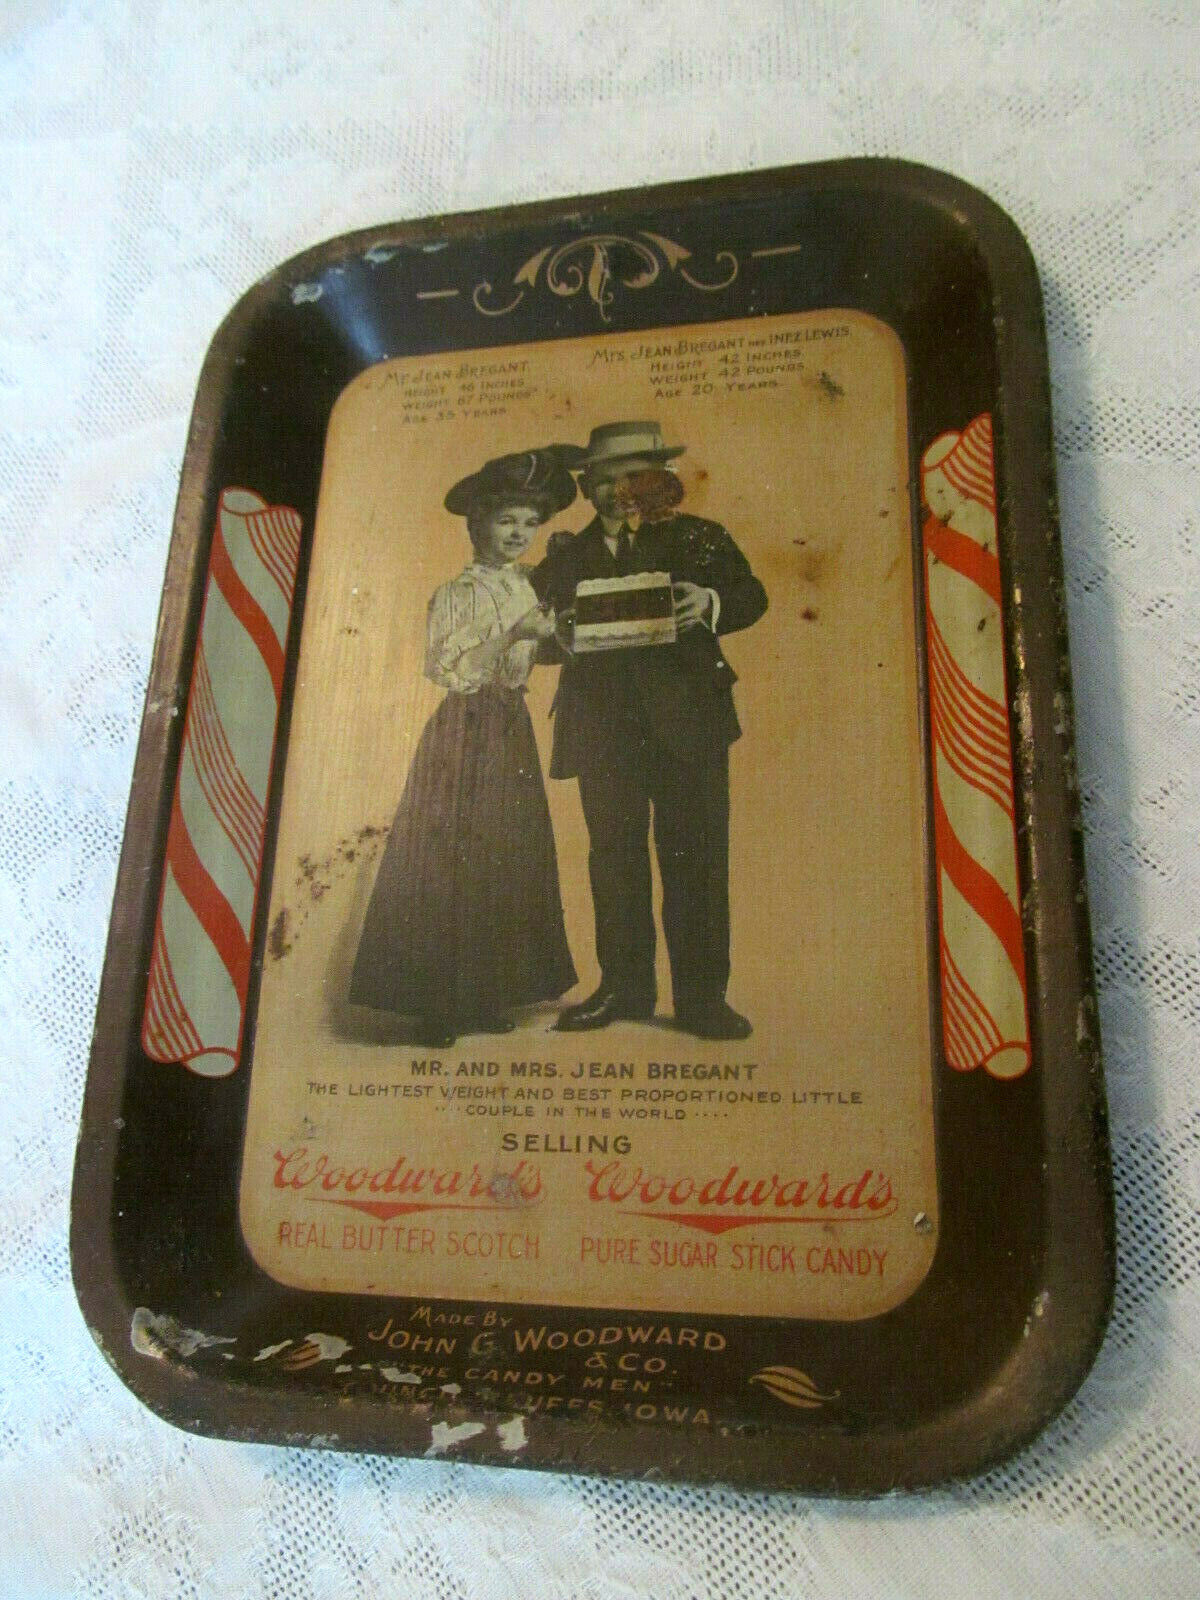 Council Bluffs Iowa WOODWARDS Candy Co Antique Advertising Tip Tray c1905-1910